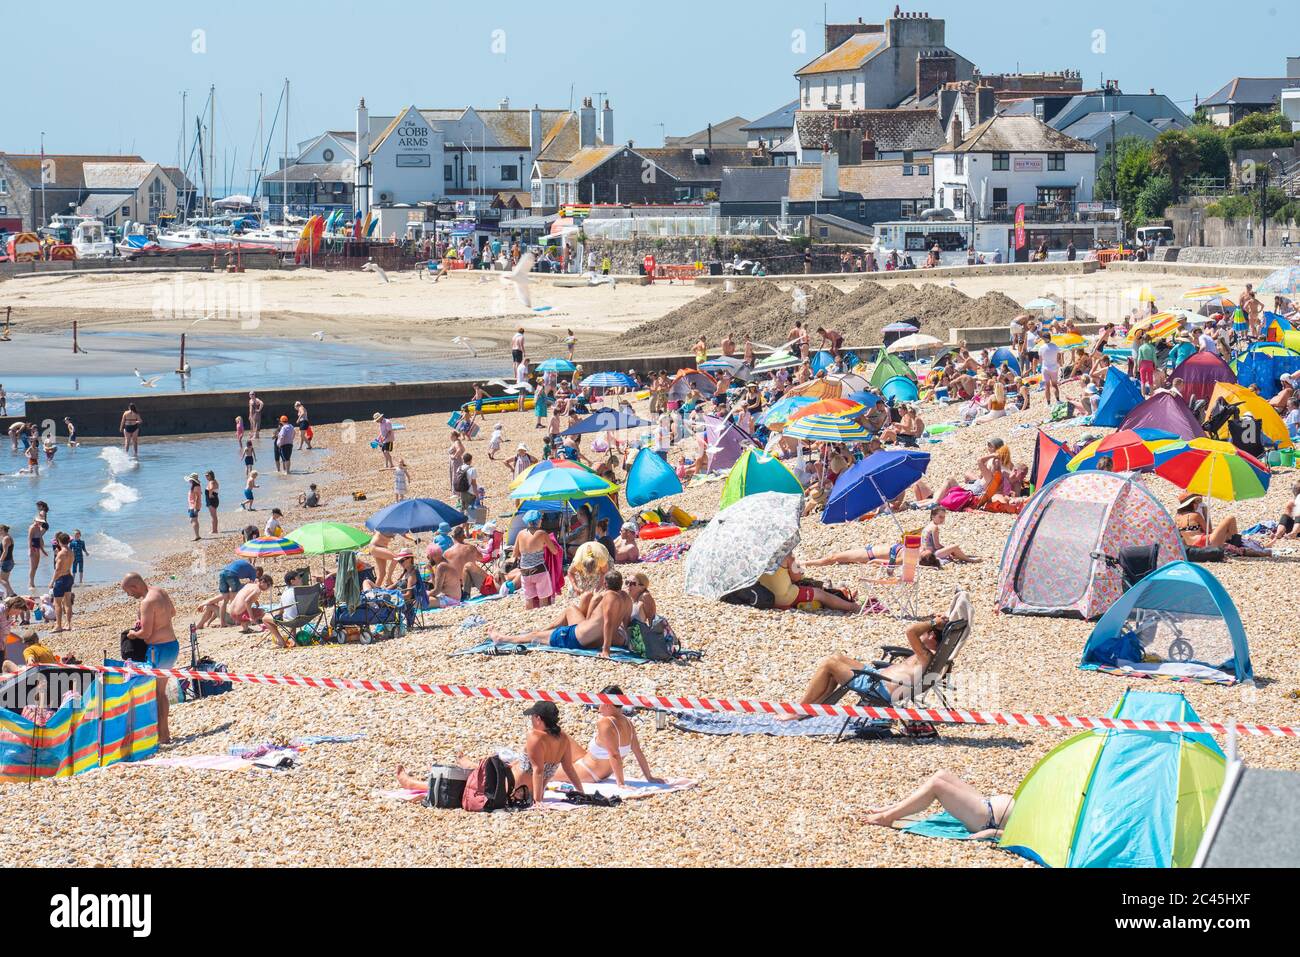 Lyme Regis, Dorset, UK. 24th June, 2020. UK Weather. Beachgoers flock to the seaside resort of Lyme Regis to soak up the scorching hot sunshine on the hottest day of the year only to find the town's main beach closed for major dredging works. Businesses in the town, already suffering major losses from the coronavirus lockdown, could be forgiven for questionning the timing of the works which are taking place on a glorious sunny day just as the town is beignning to welcome visitors back Credit: Celia McMahon/Alamy Live News Stock Photo